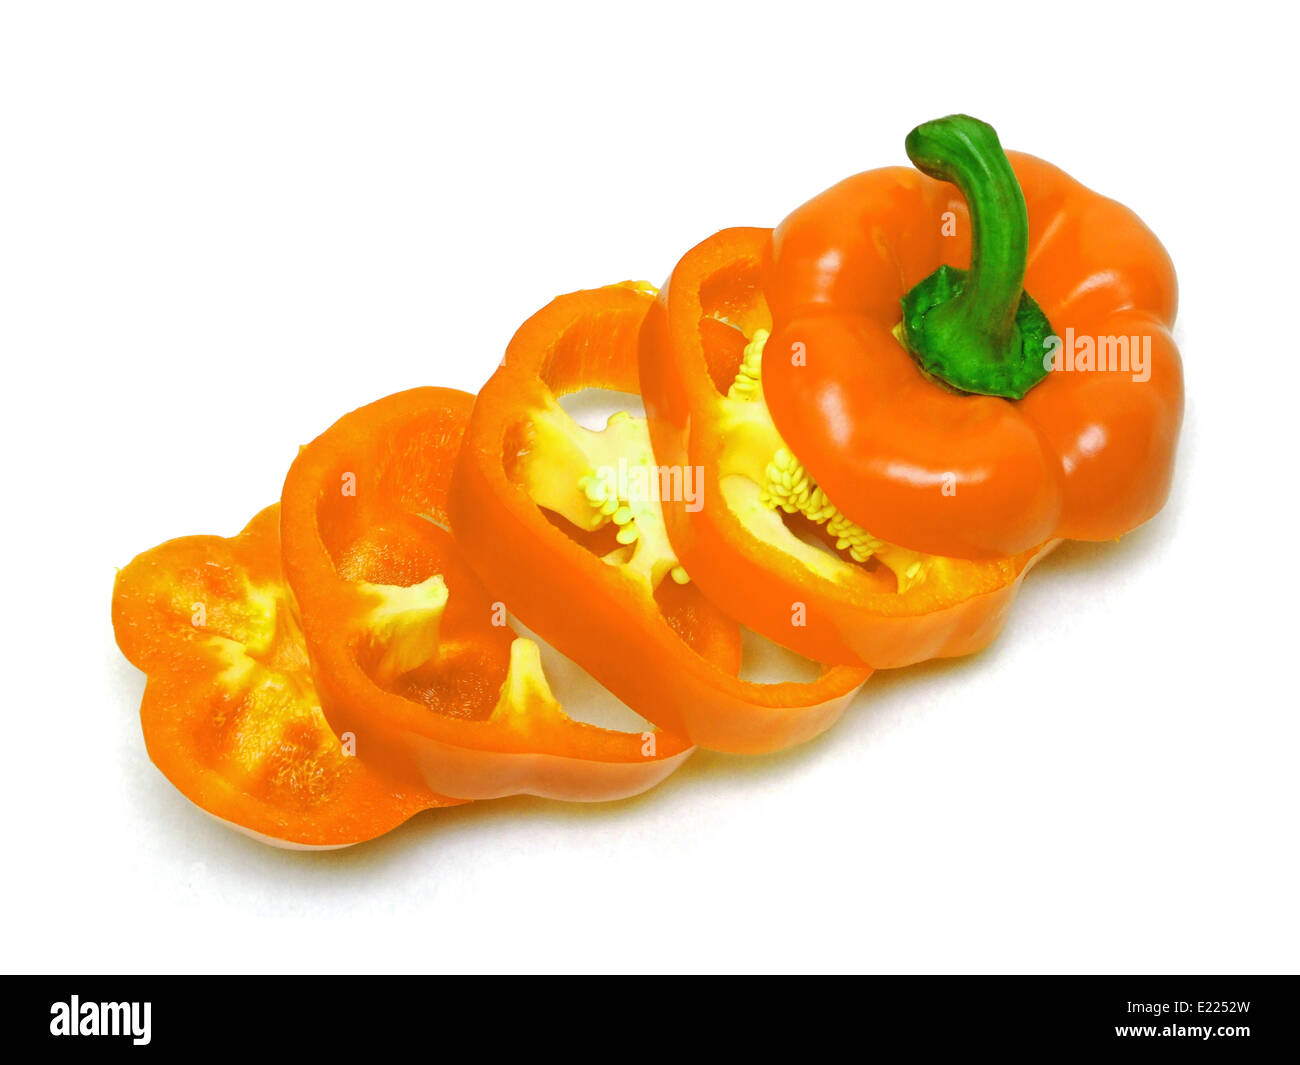 orange bell peppers Stock Photo